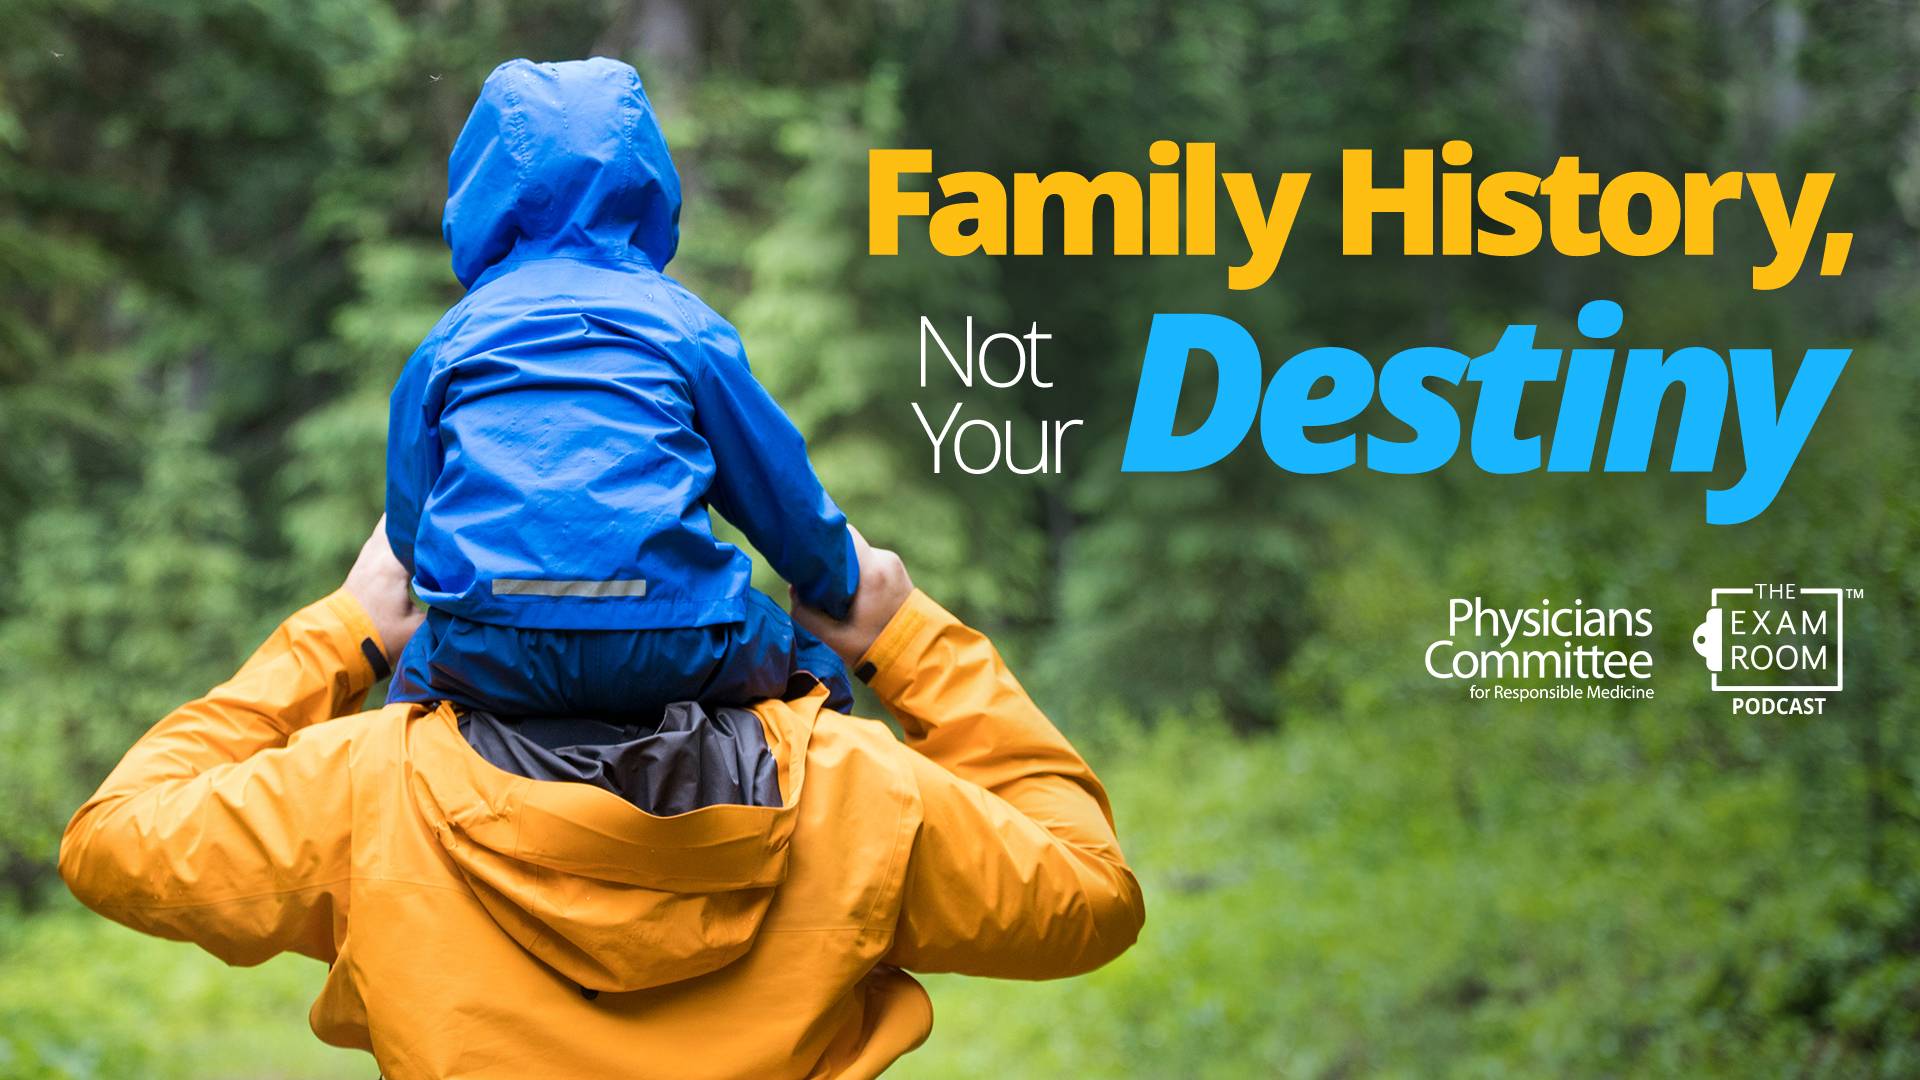 Family History, Not Your Destiny: Taking Control of Your Health